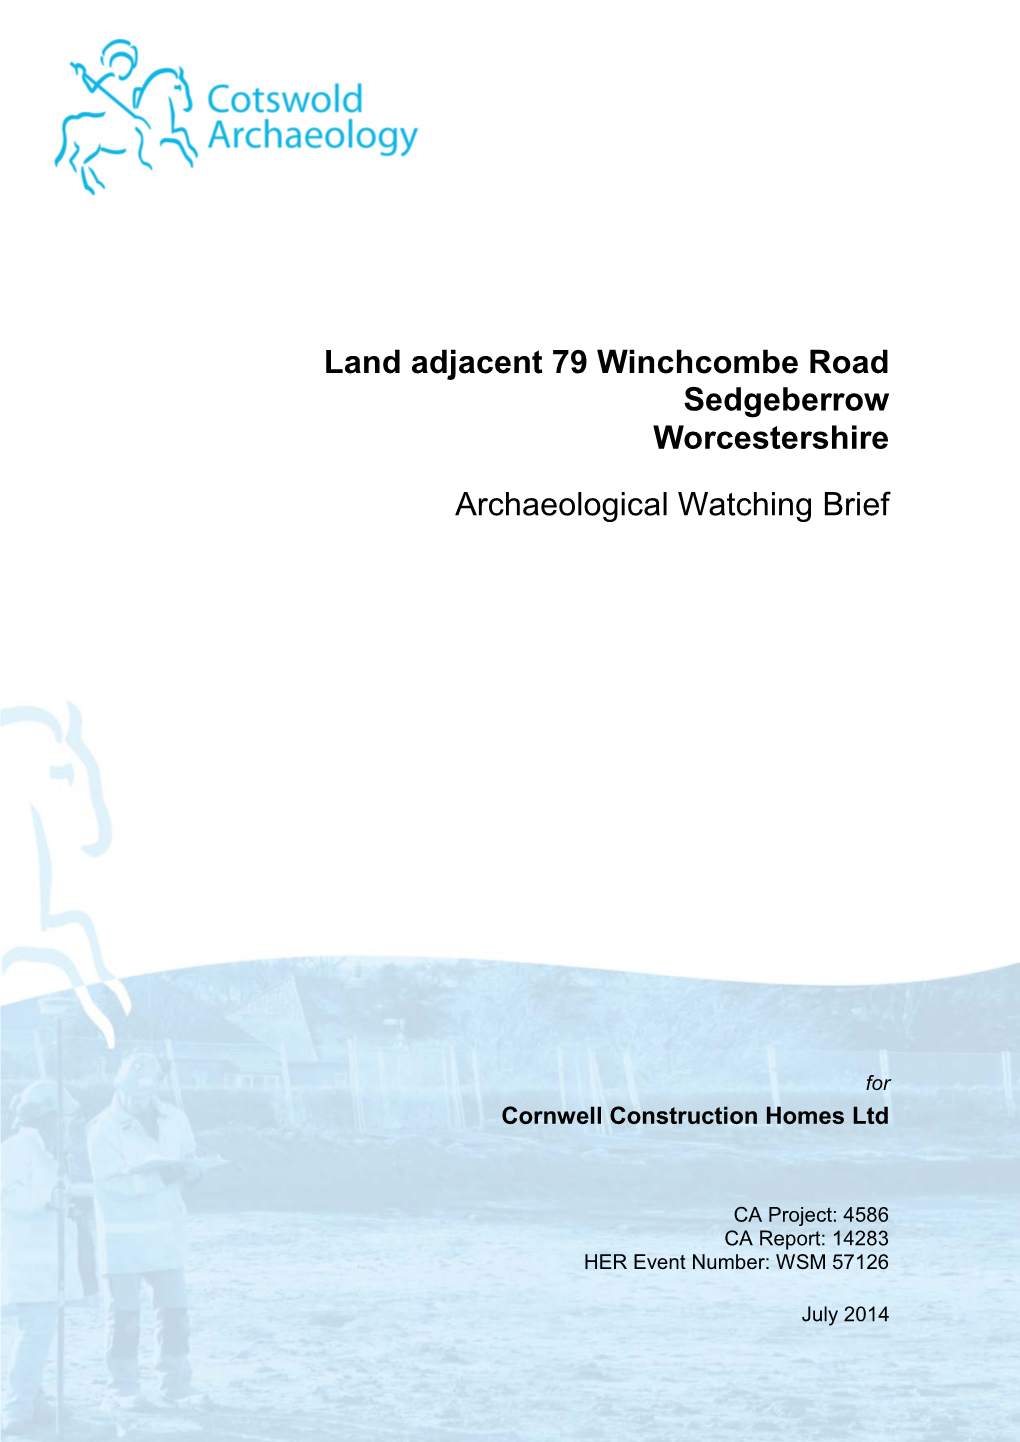 Land Adjacent 79 Winchcombe Road Sedgeberrow Worcestershire Archaeological Watching Brief